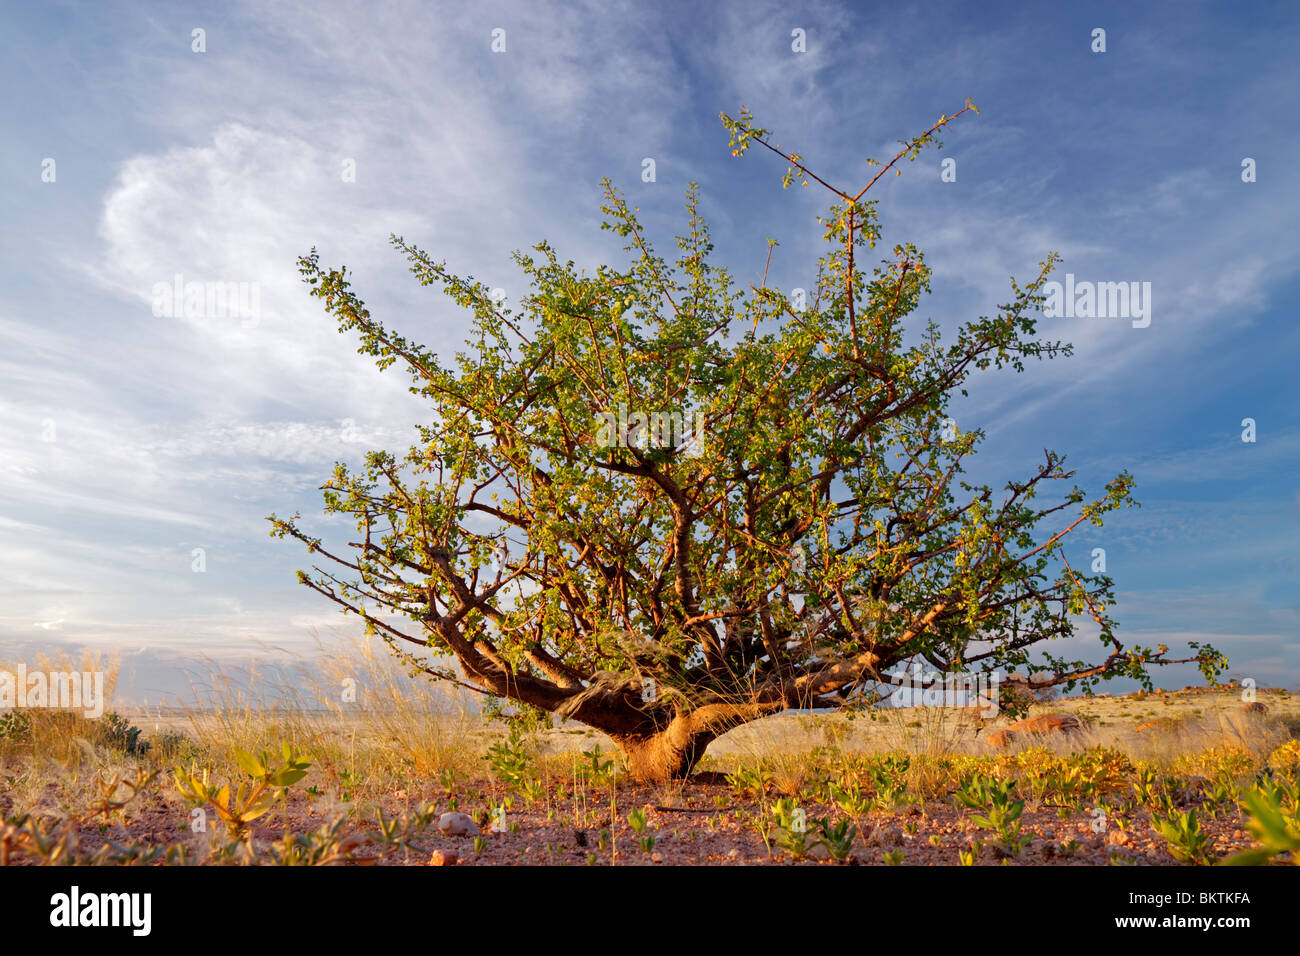 A desert plant (Commiphora spp.) against a blue sky with clouds, Namibia, southern Africa Stock Photo